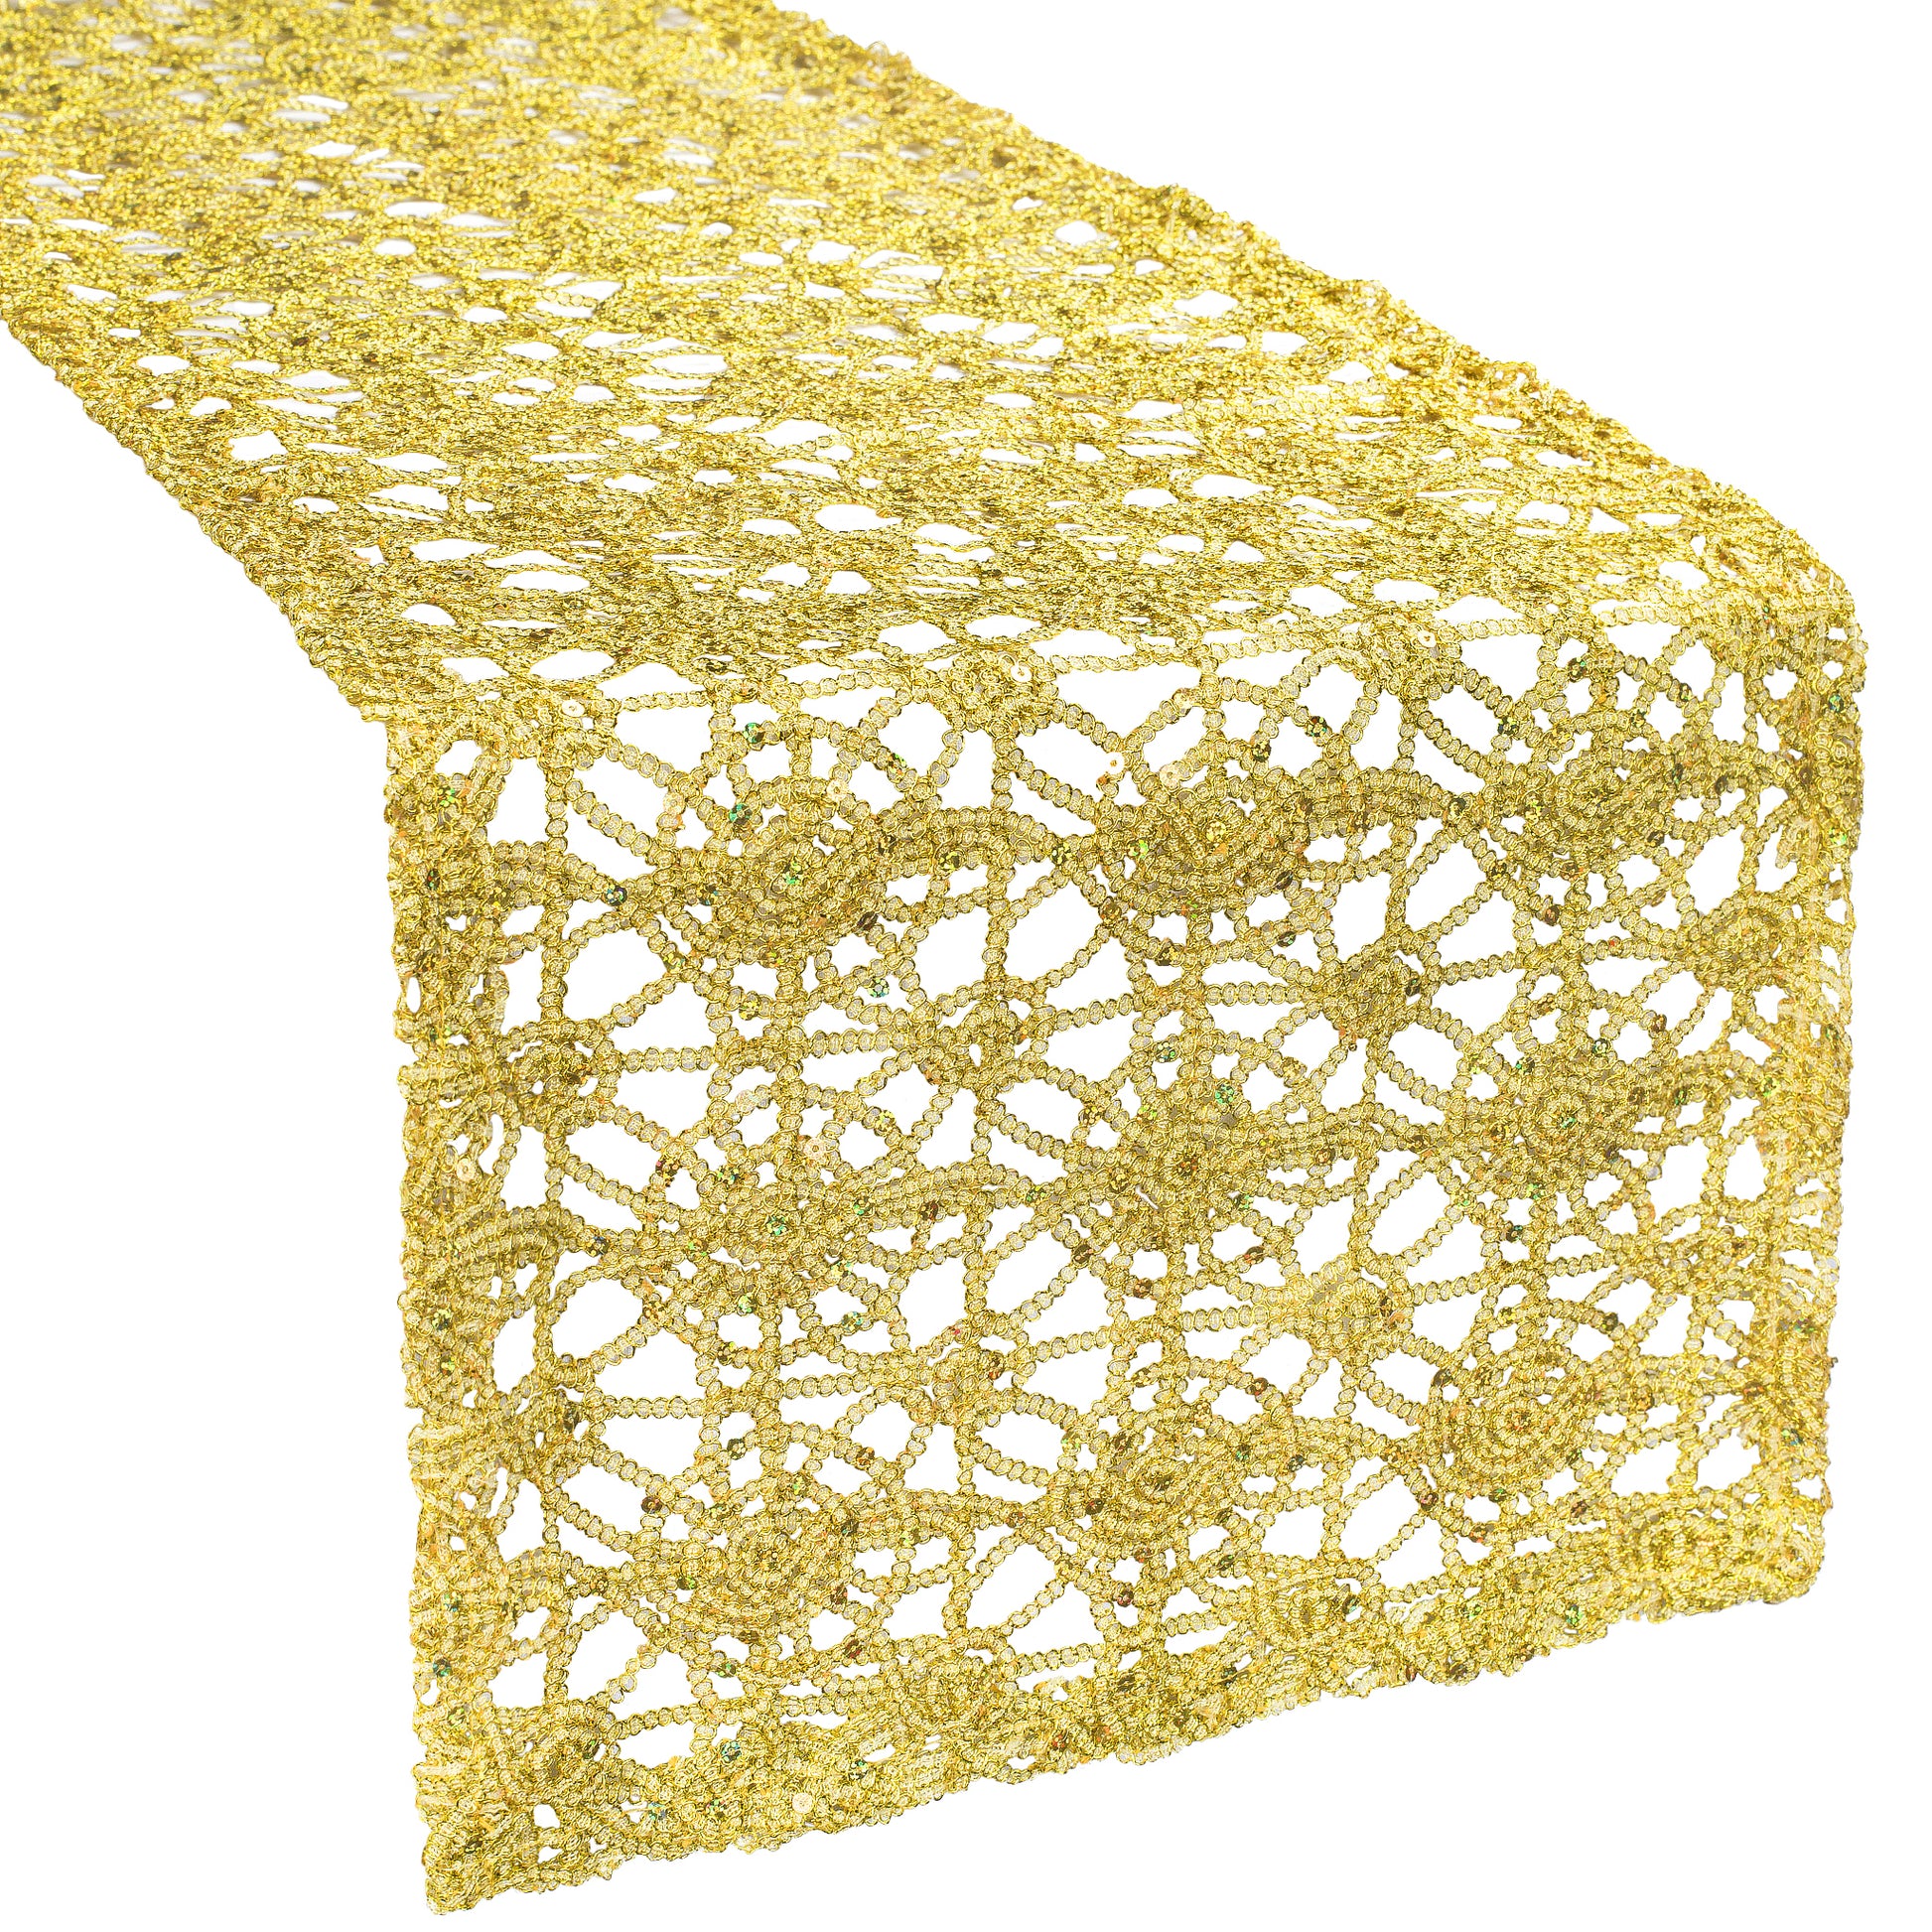 Chemical Lace Table Runner - Gold - CV Linens